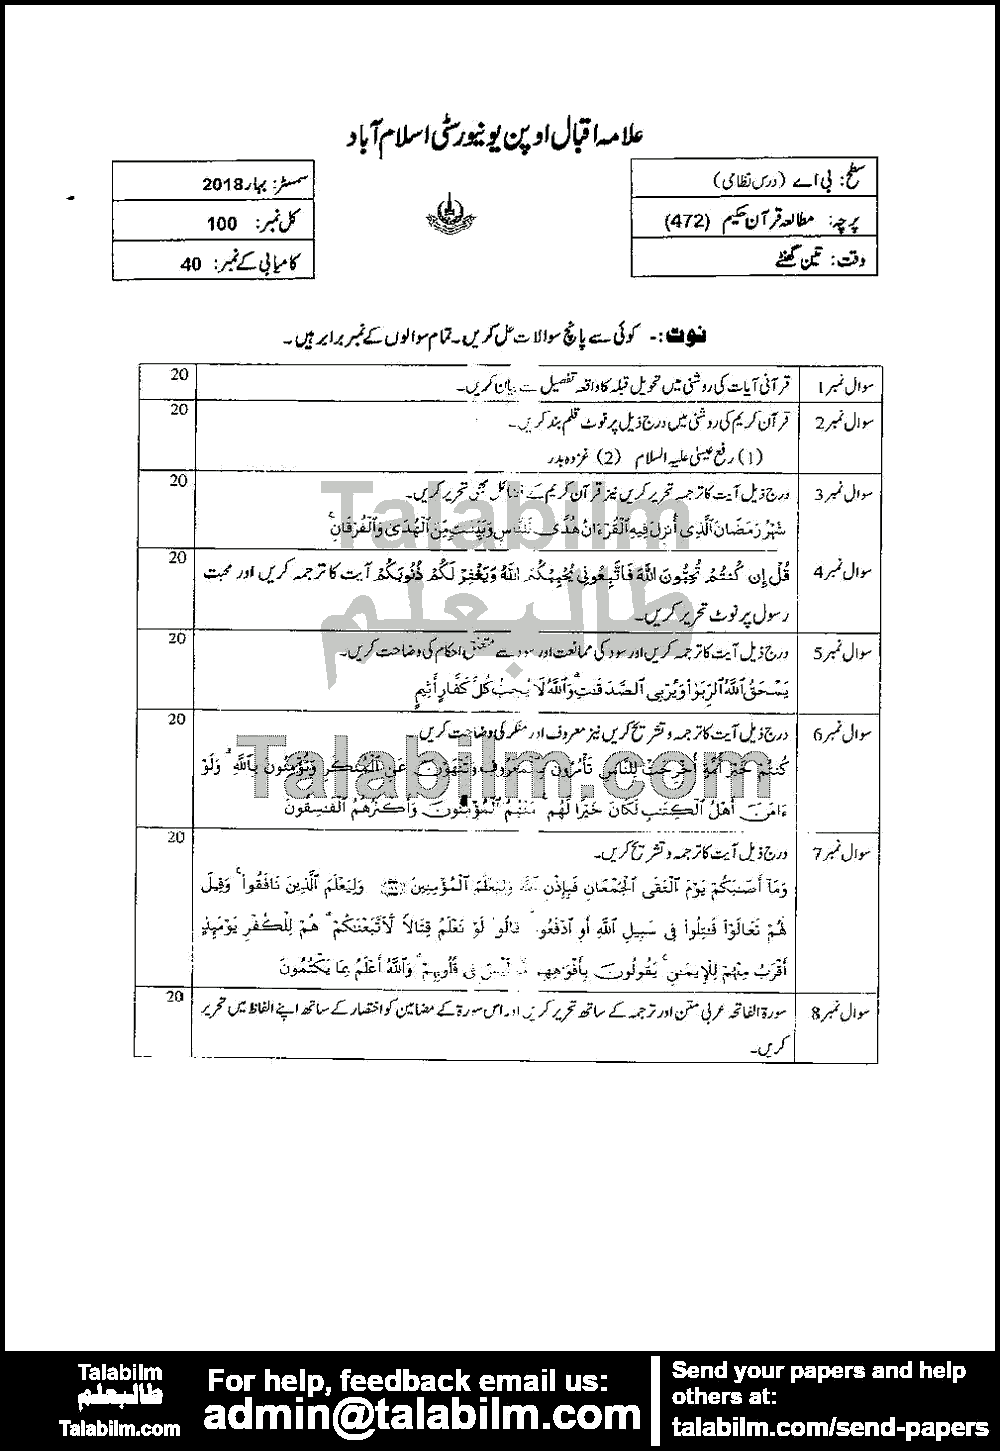 Quran-e-Hakim 472 past paper for Spring 2018